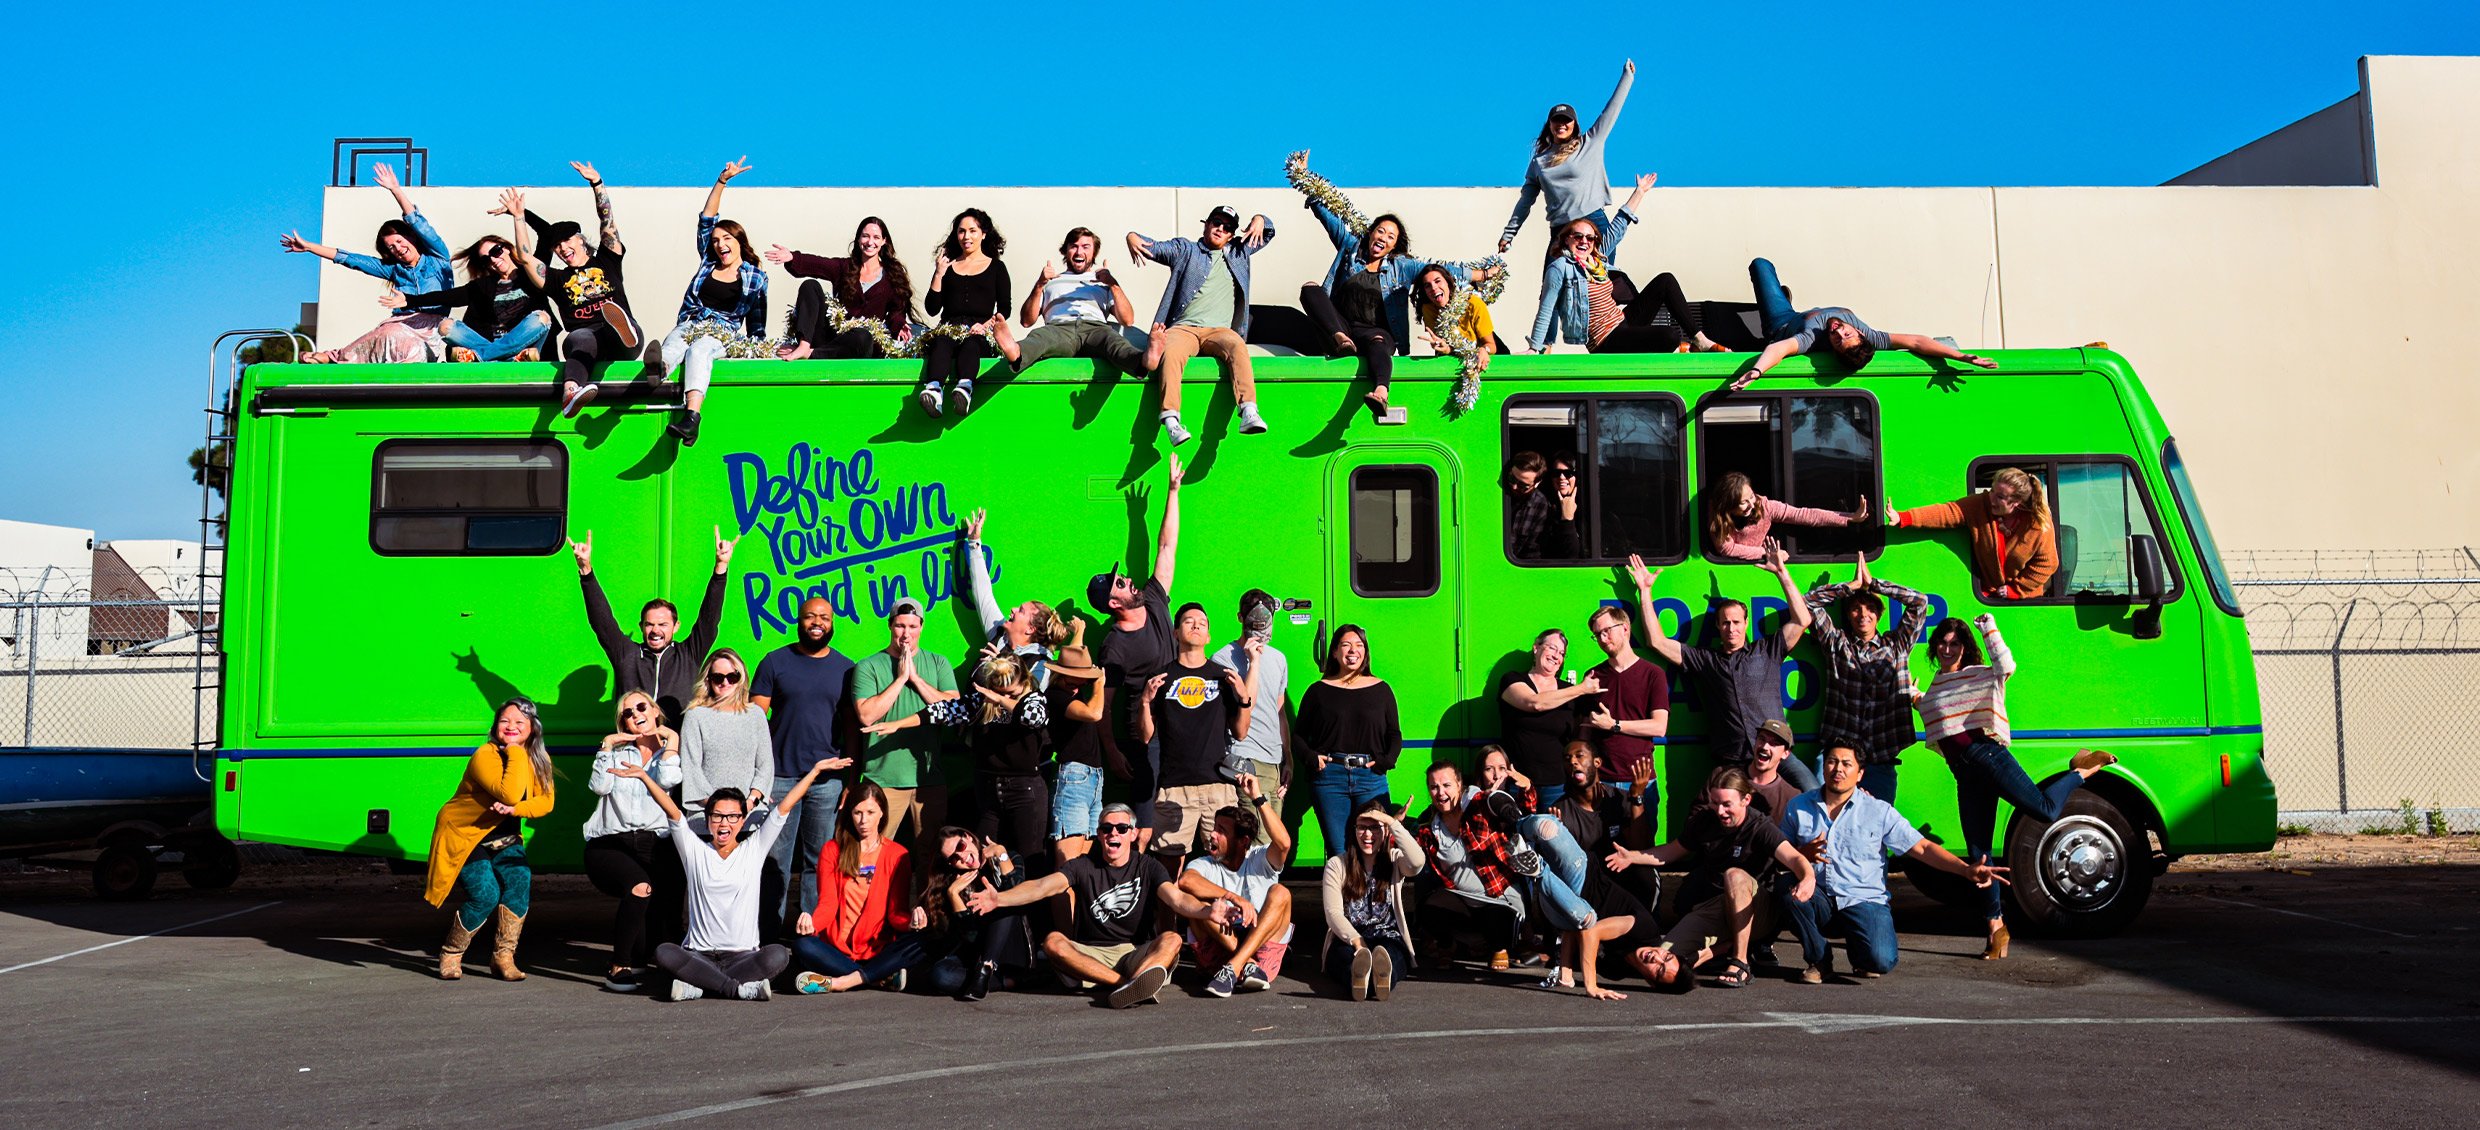 The Roadtrip Nation staff does a goofy pose in front of the green RV.